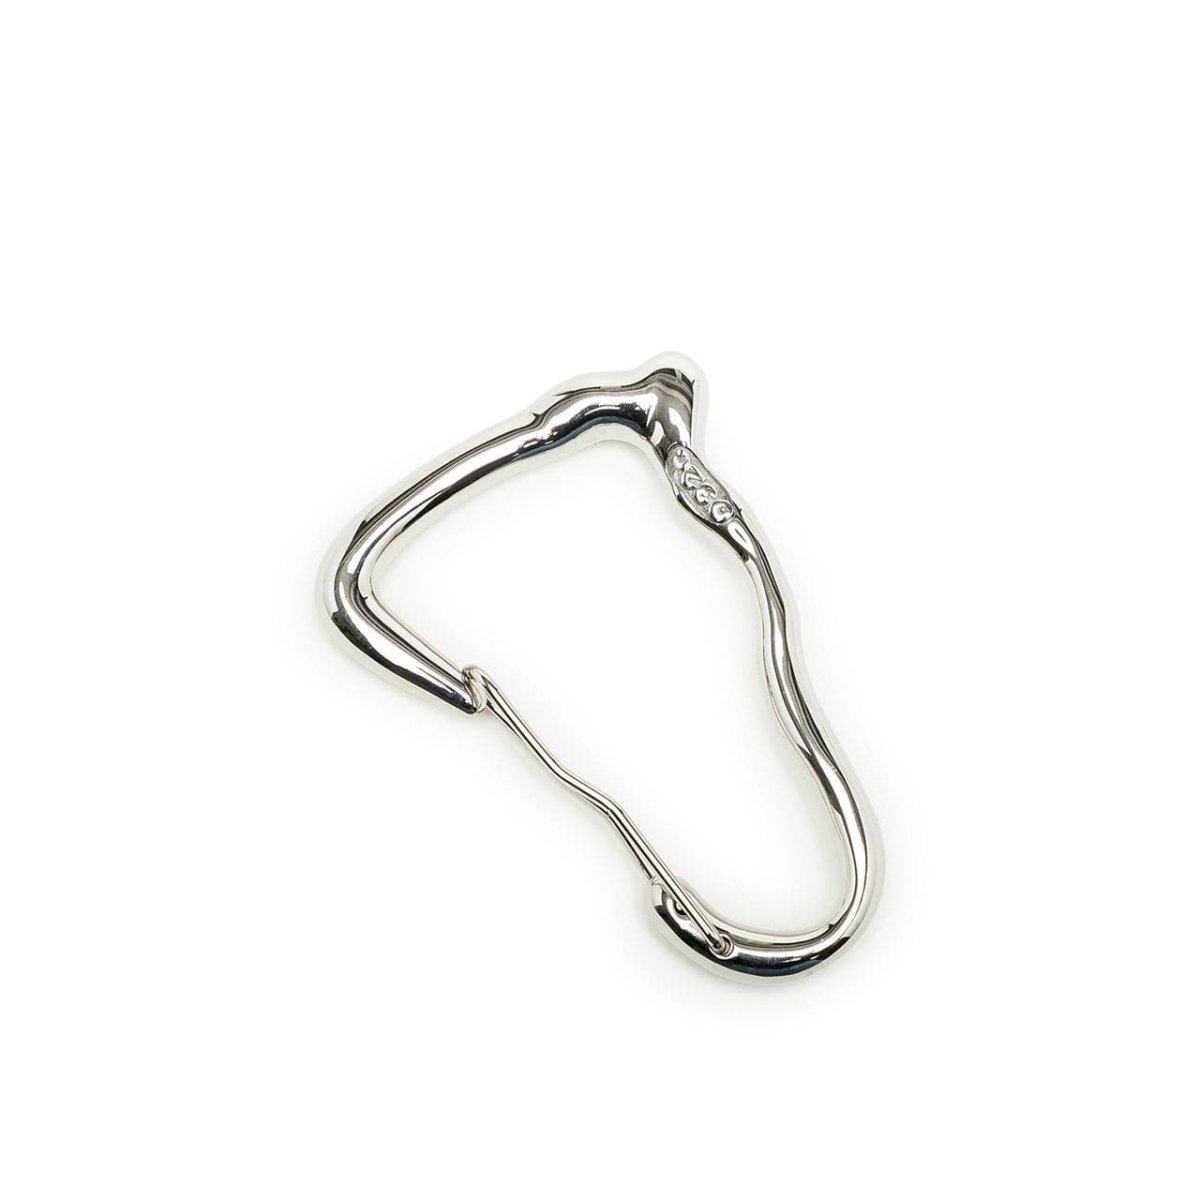 Image of 032c Liquified Carabiner (Silver)